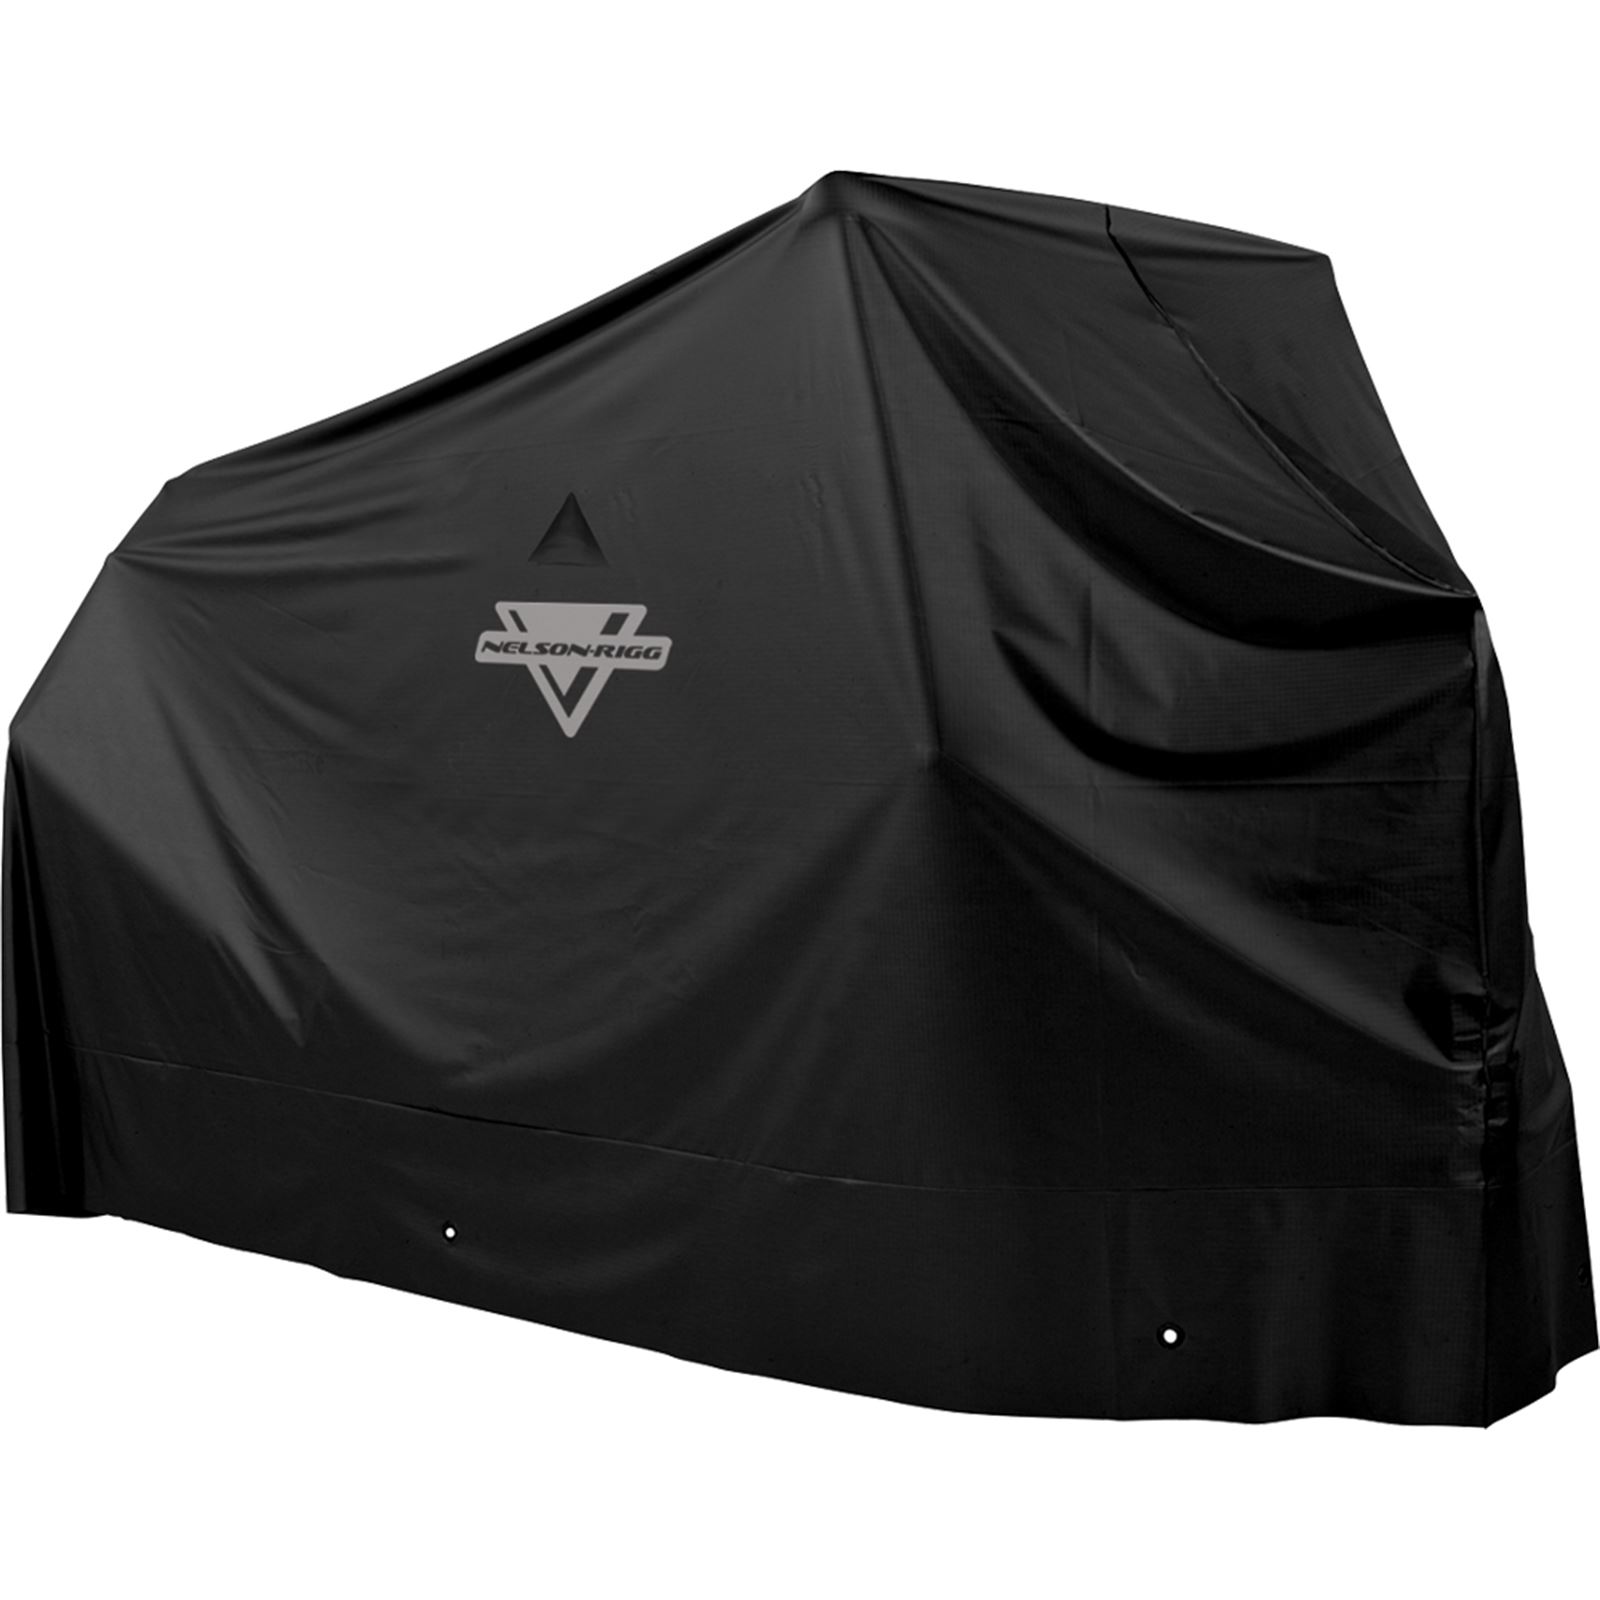 Nelson-Rigg Econo Cycle Cover